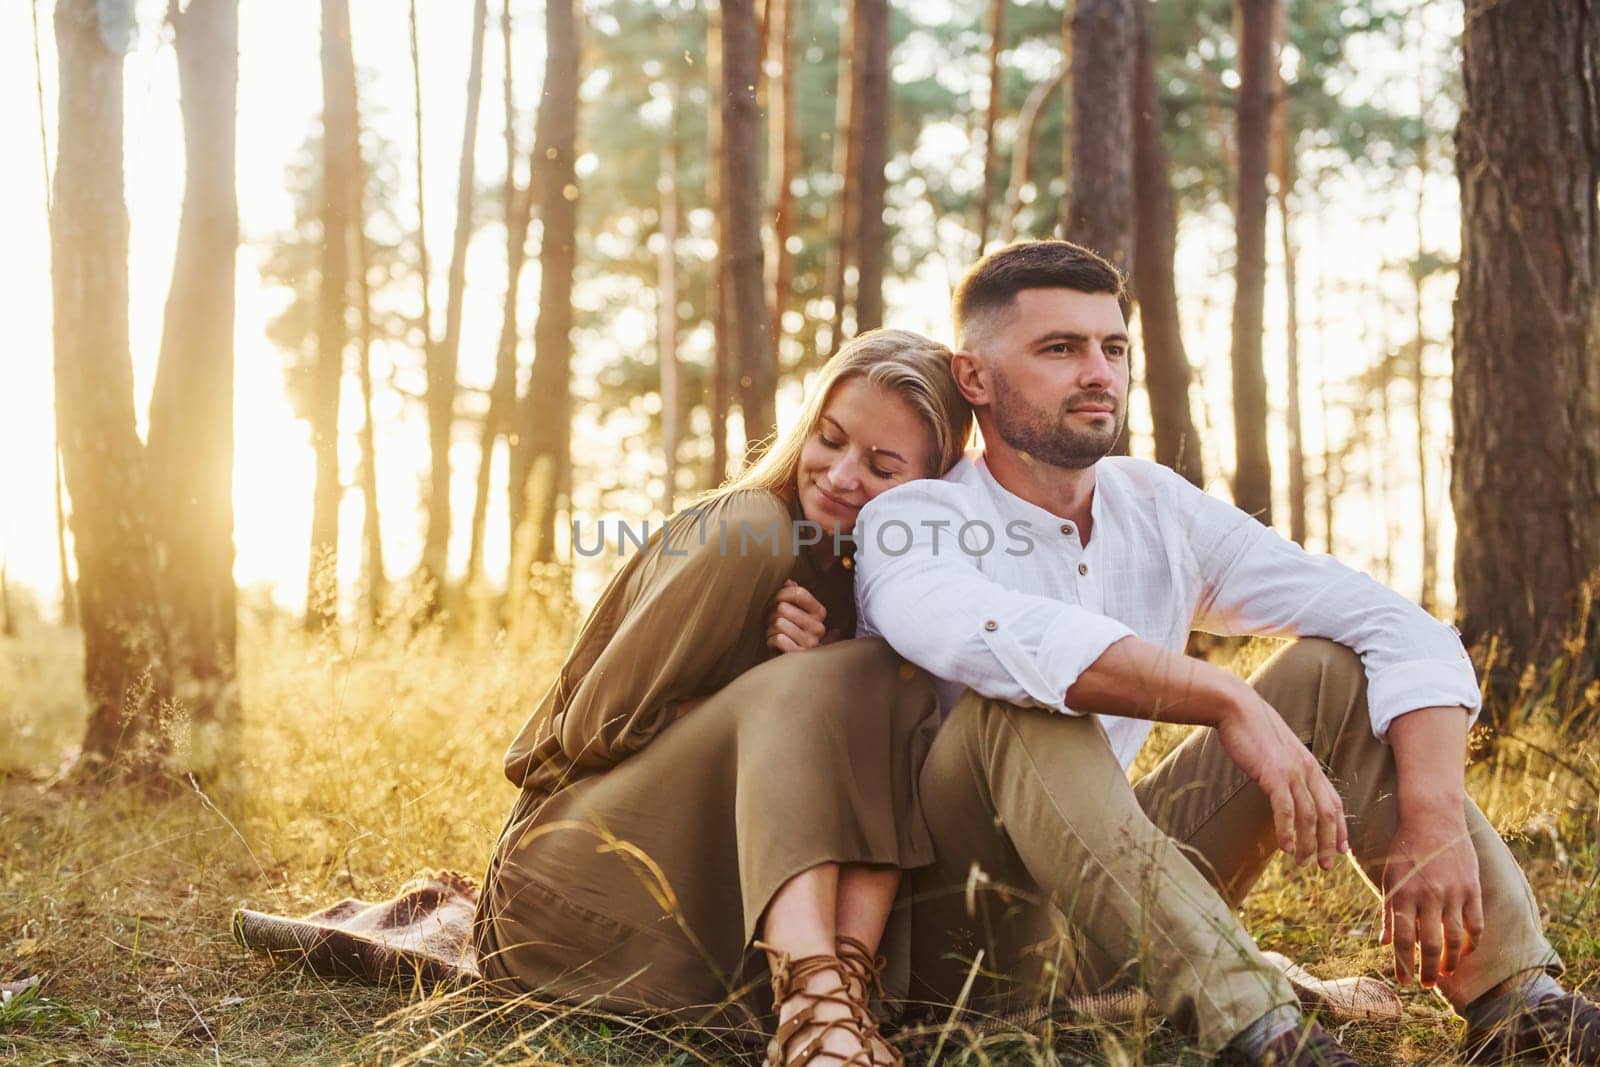 Illuminated by sunlight. Happy couple is outdoors in the forest at daytime.